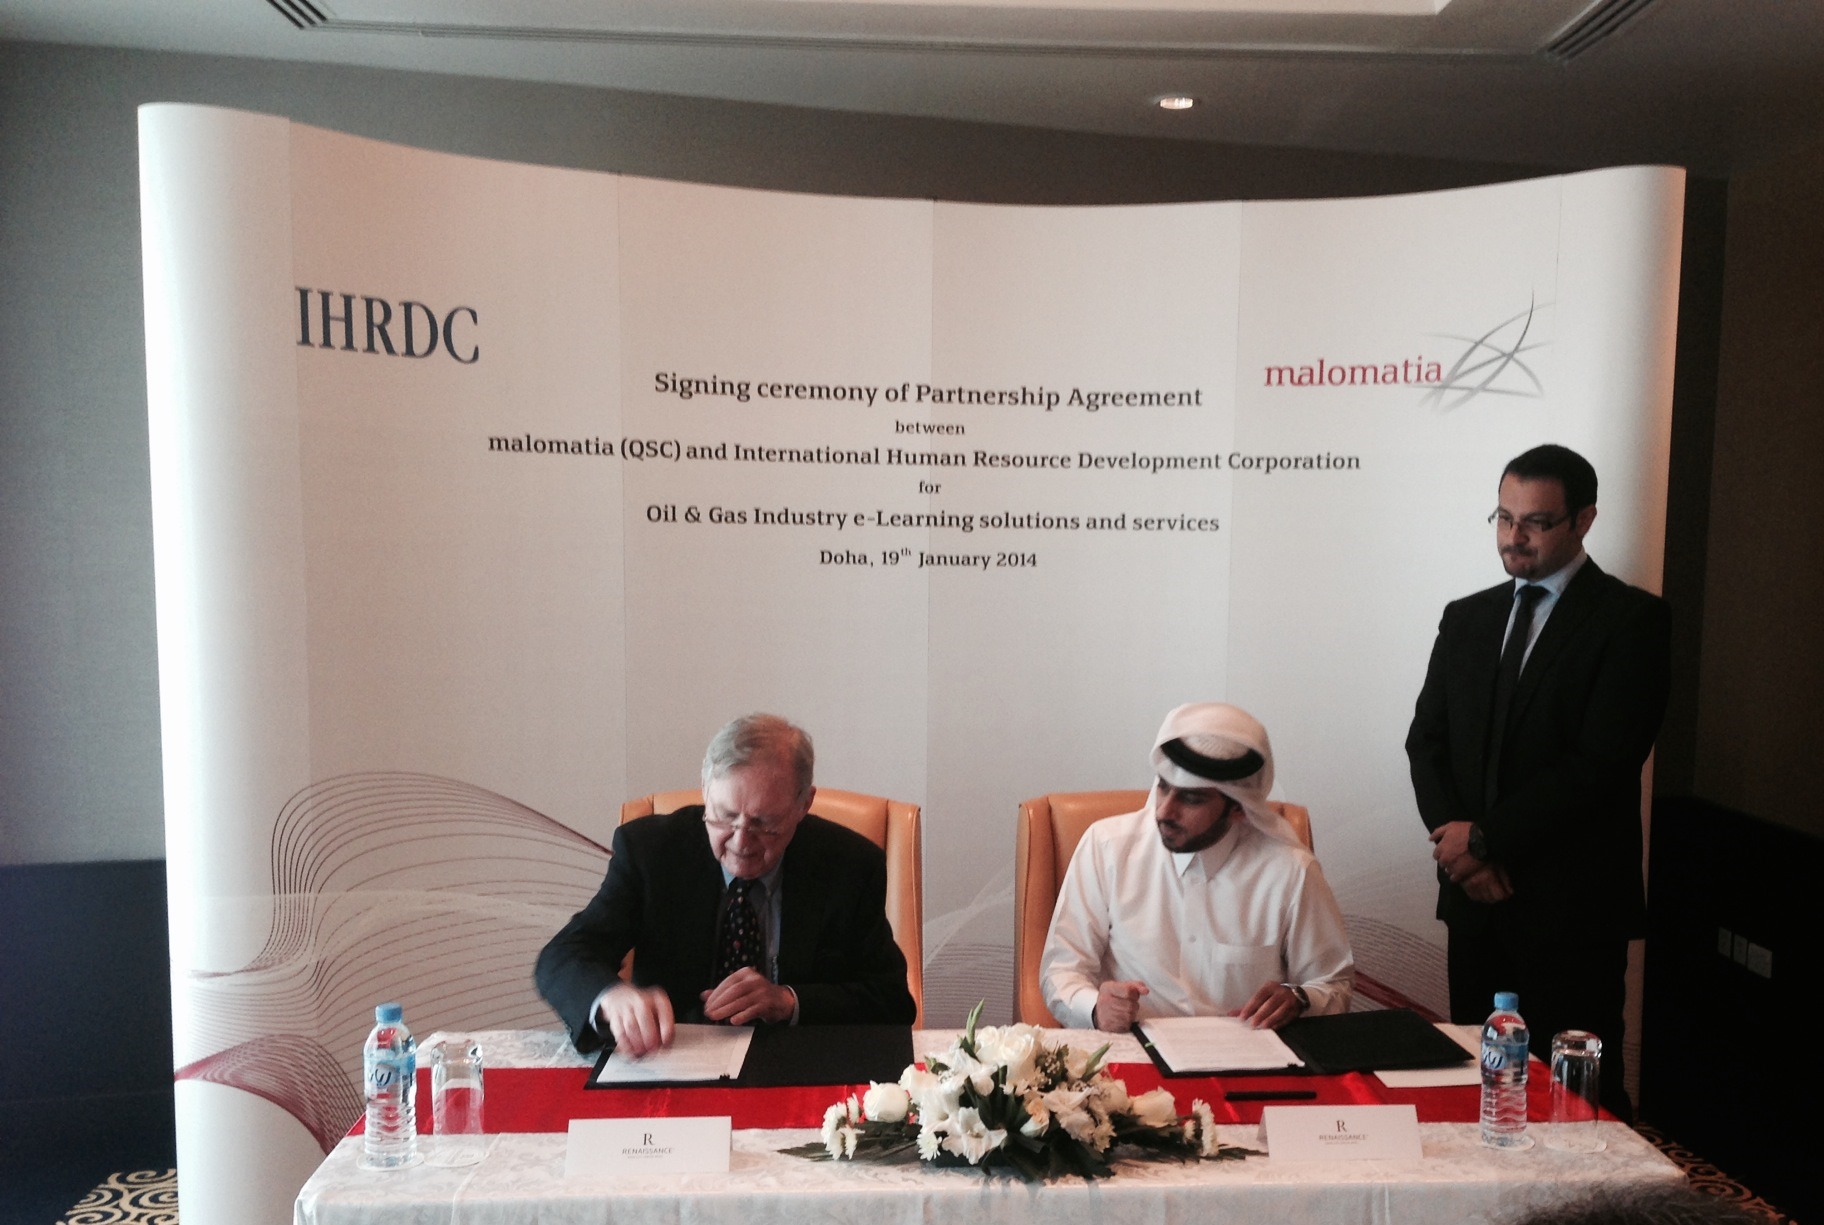 malomatia signs partnership agreement with IHRDC for Oil & Gas e-Learning Solutions and Services